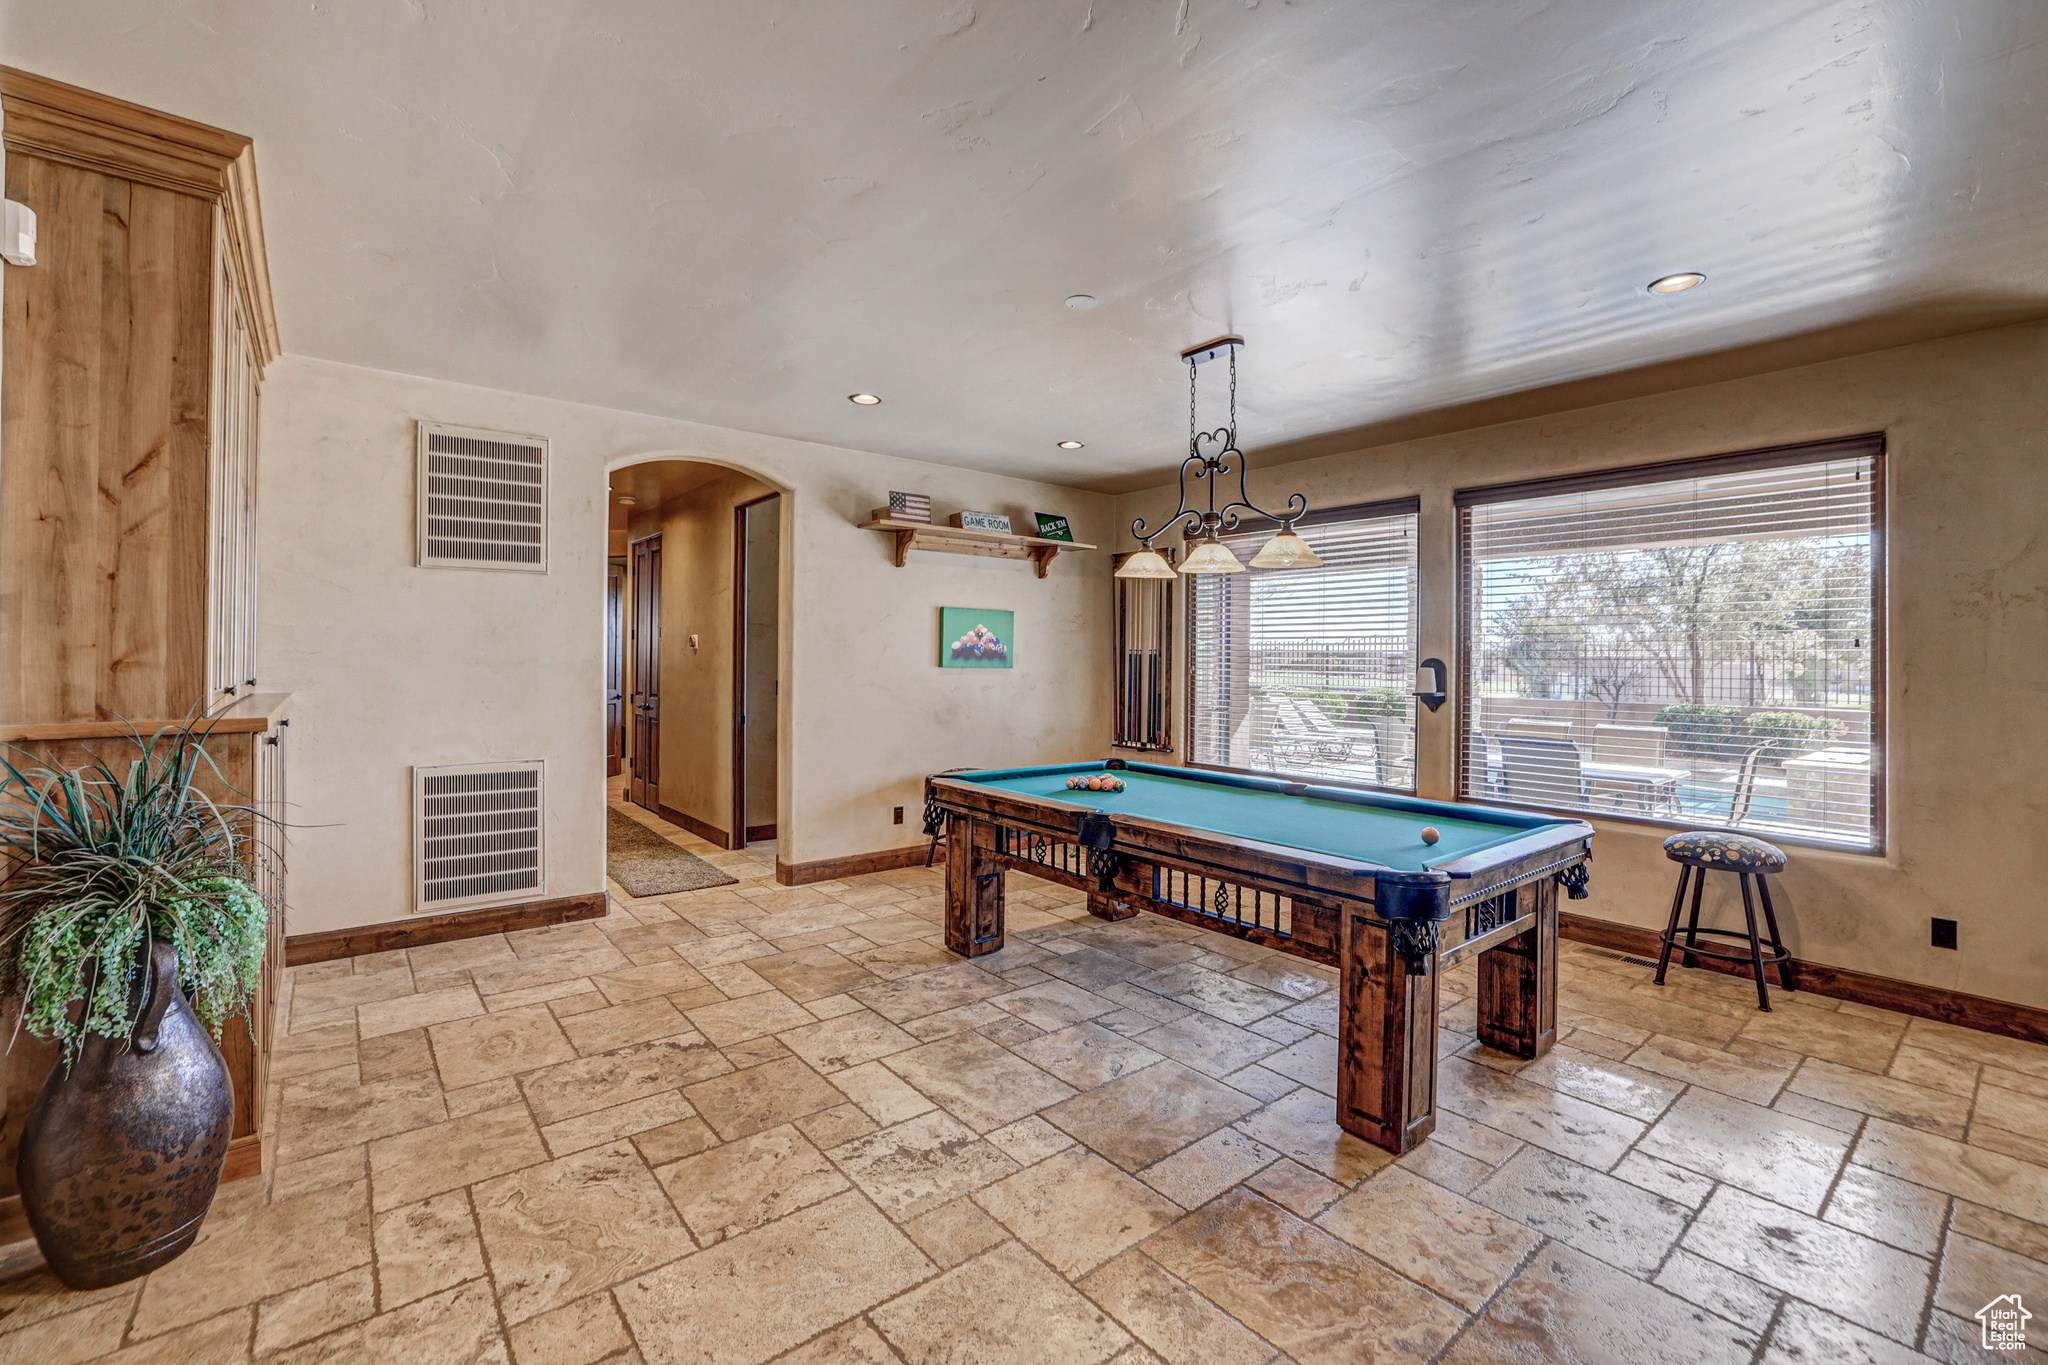 Rec room featuring a healthy amount of sunlight, light tile floors, and billiards